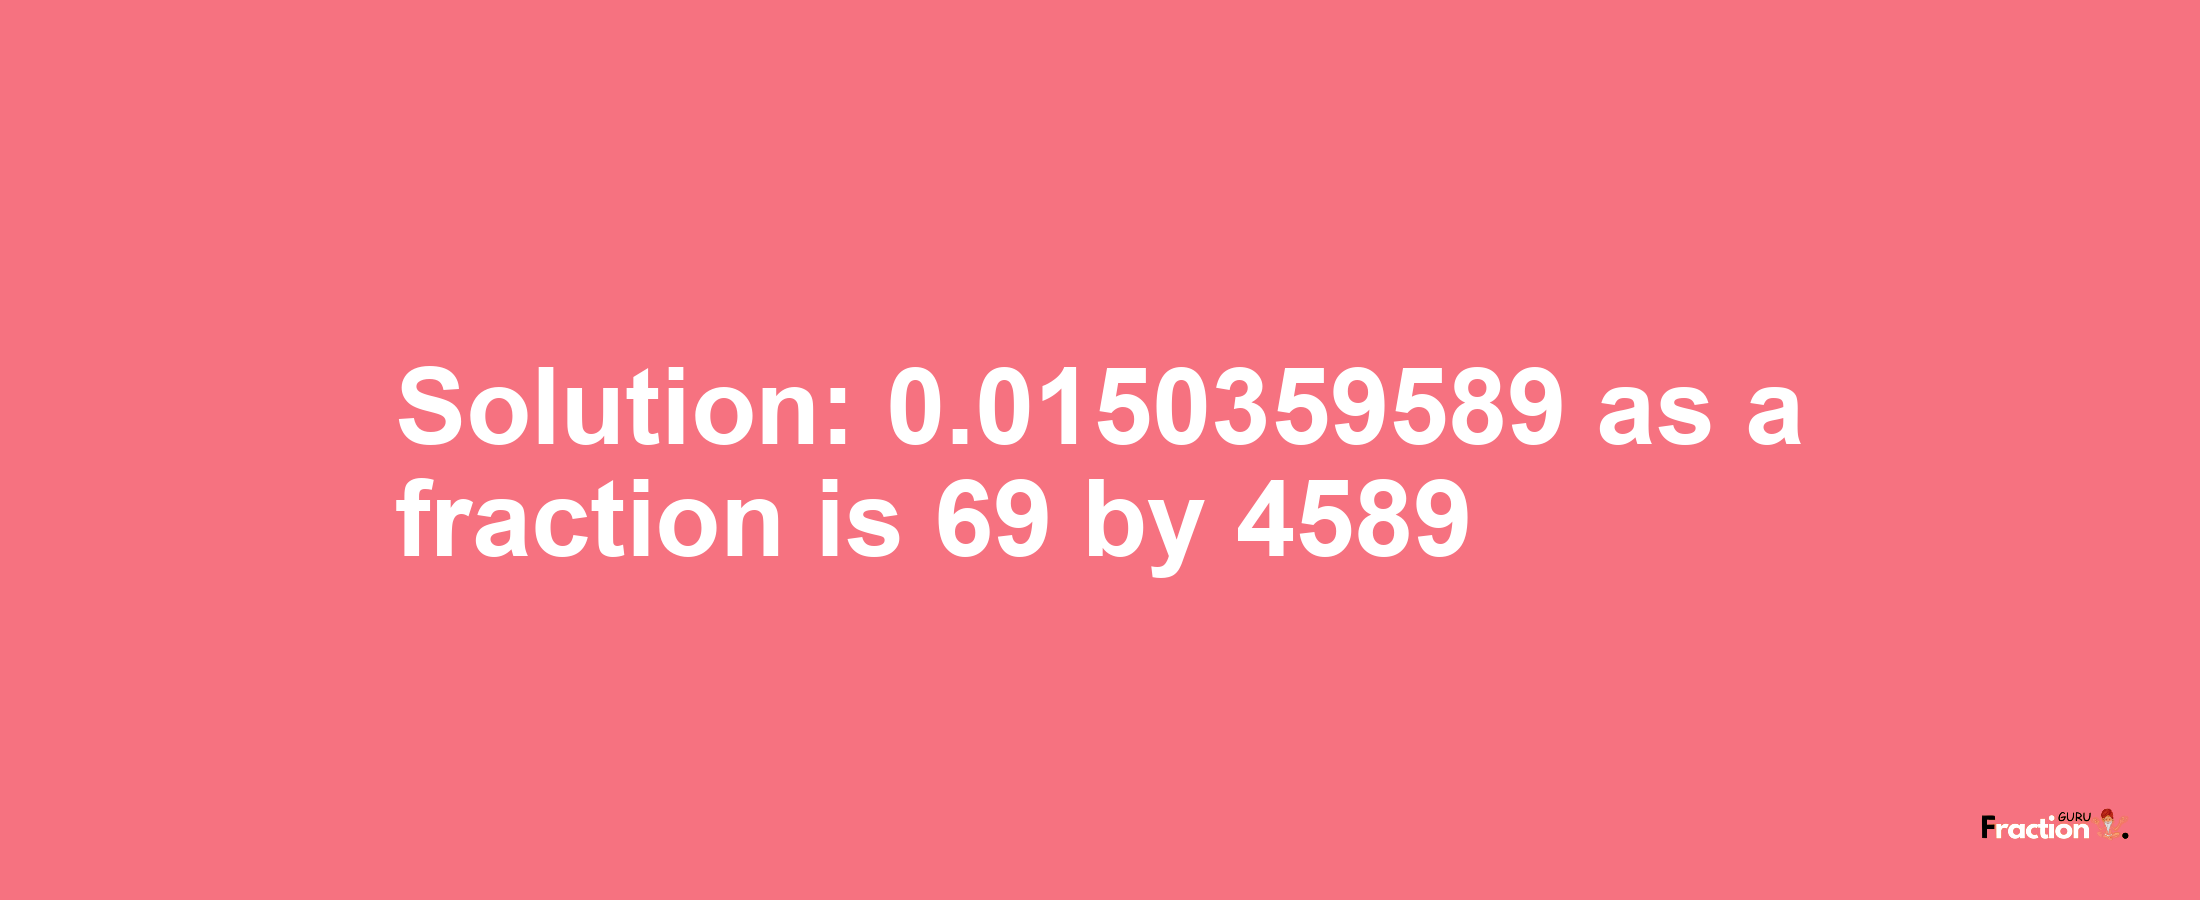 Solution:0.0150359589 as a fraction is 69/4589